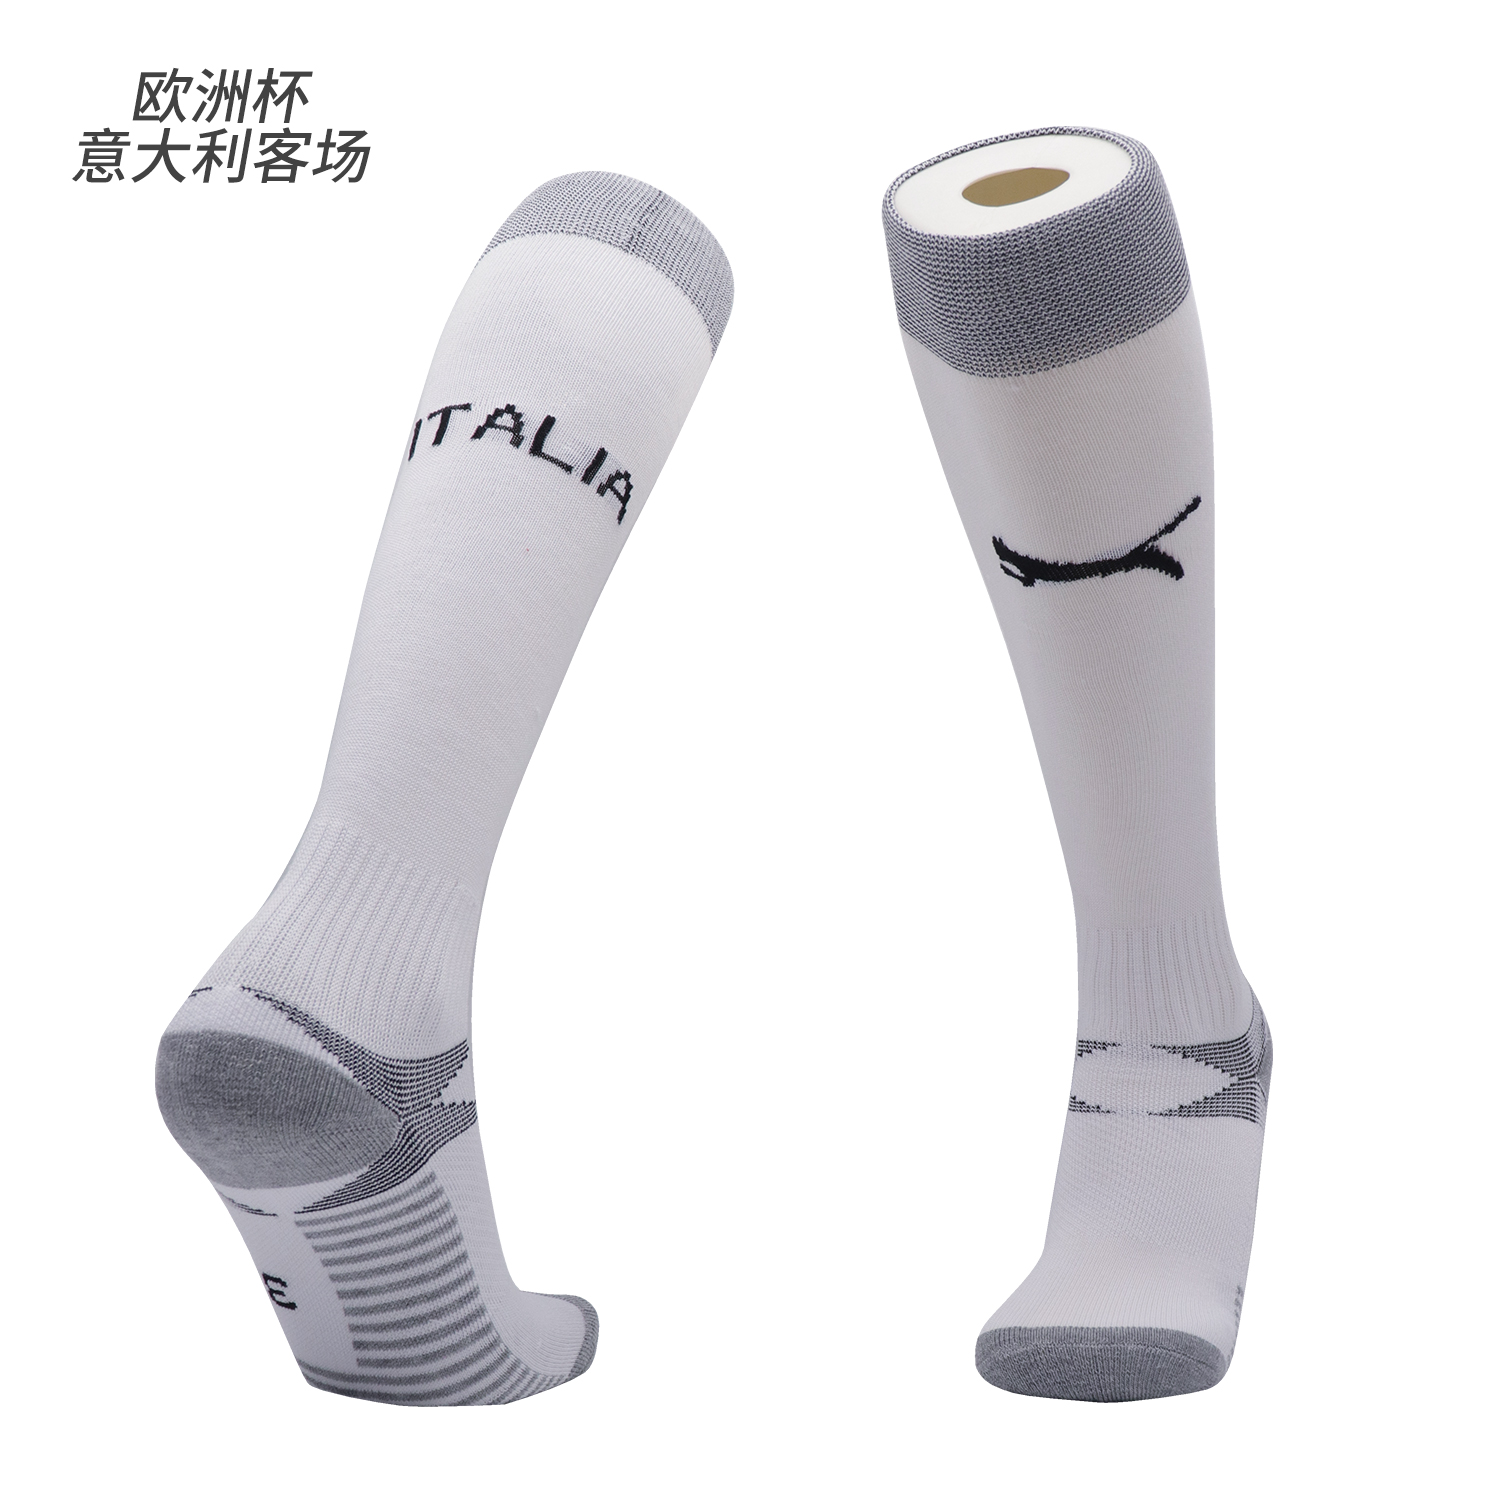 AAA Quality Italy 2020 European Cup White Soccer Socks